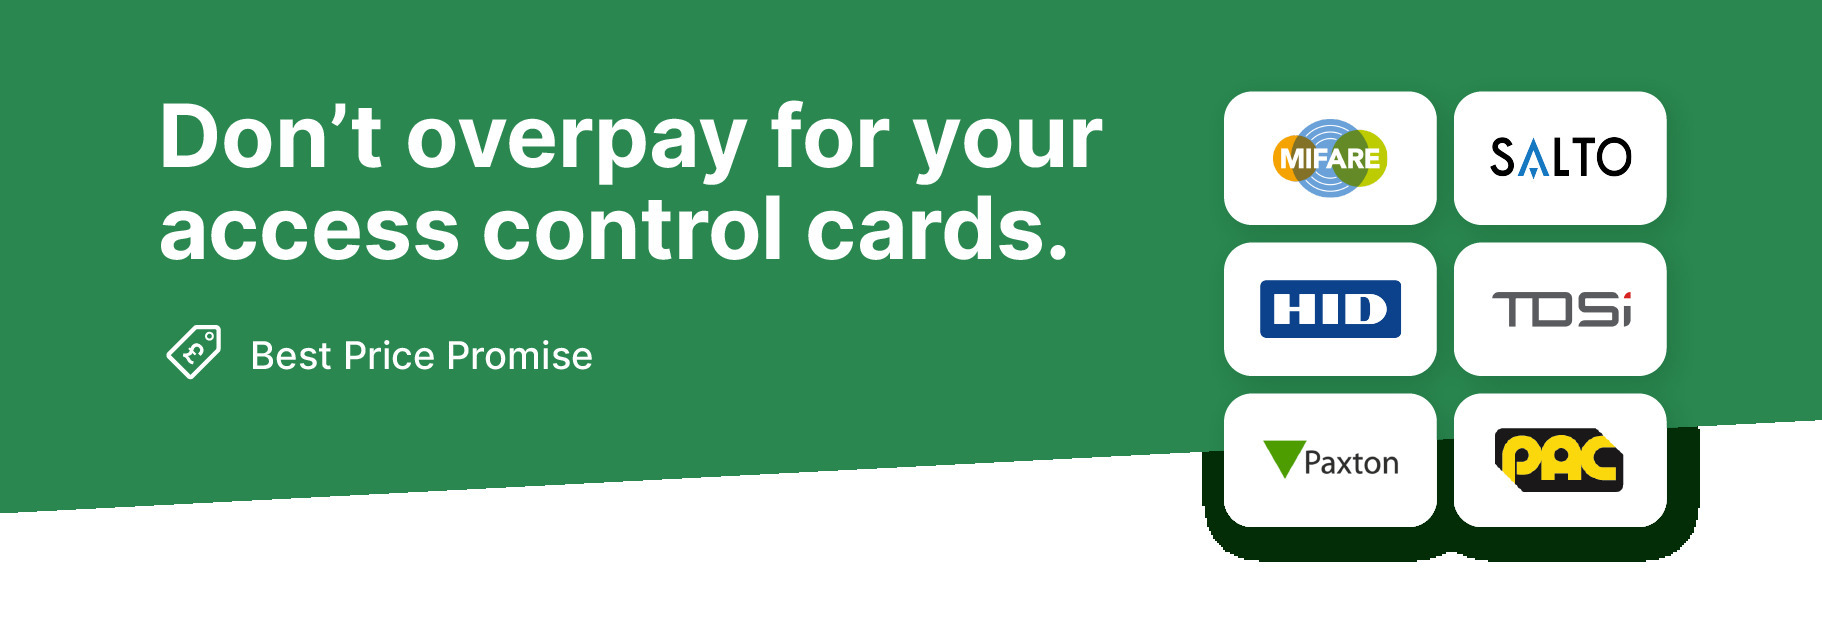 Don't overpay for your access control cards. Contact us.